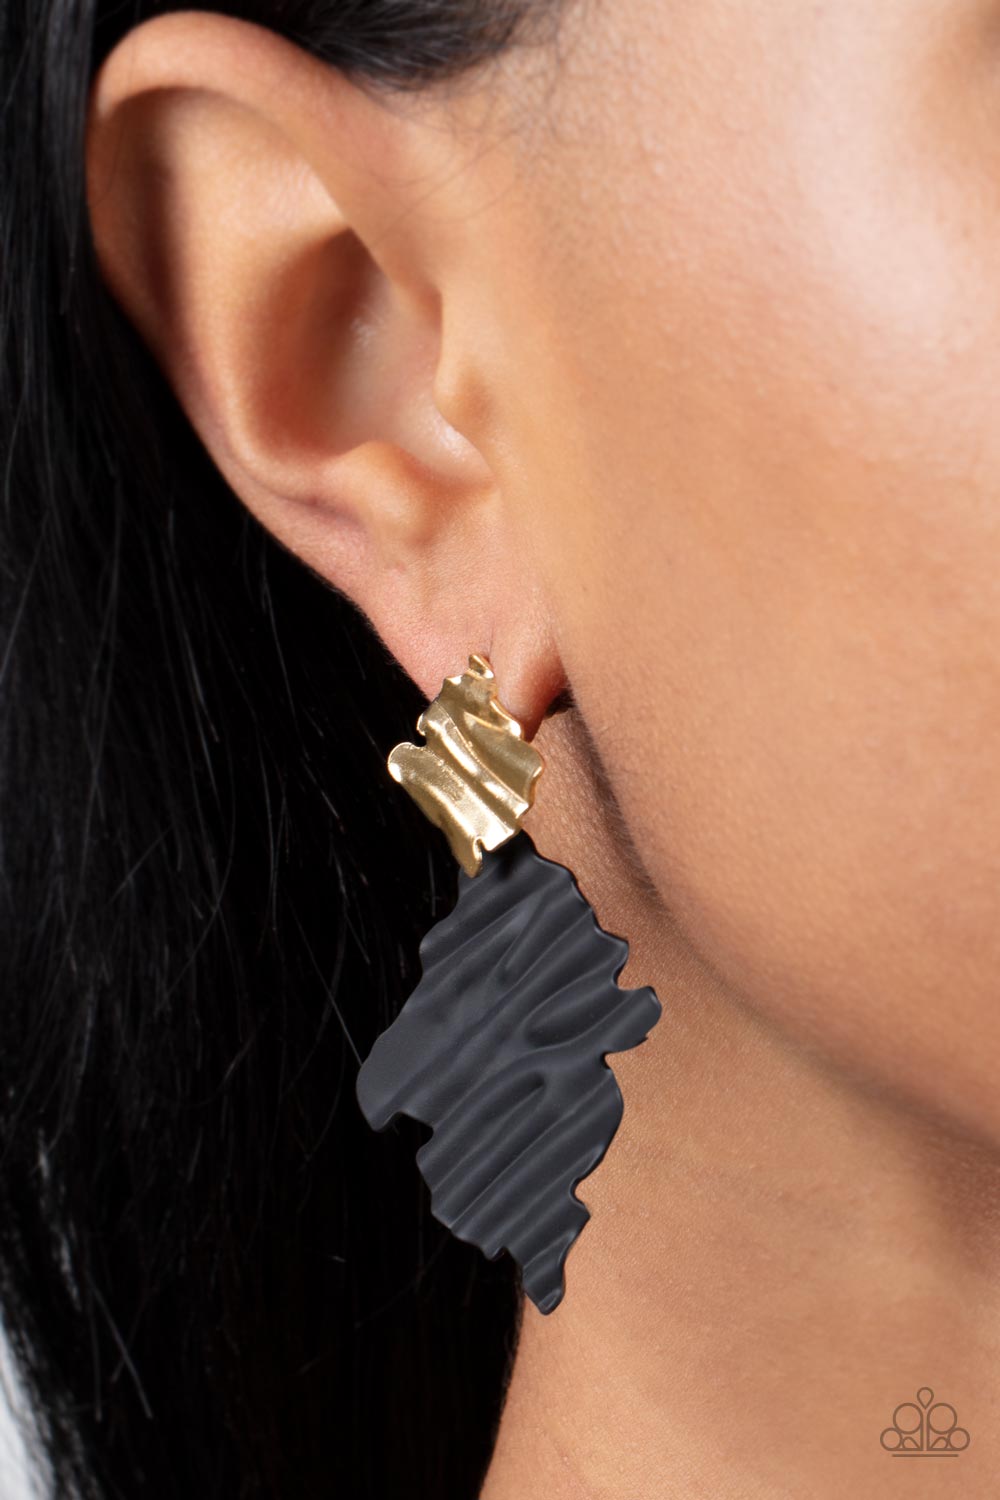 Crimped Couture - Gold & Black Earrings - Princess Glam Shop